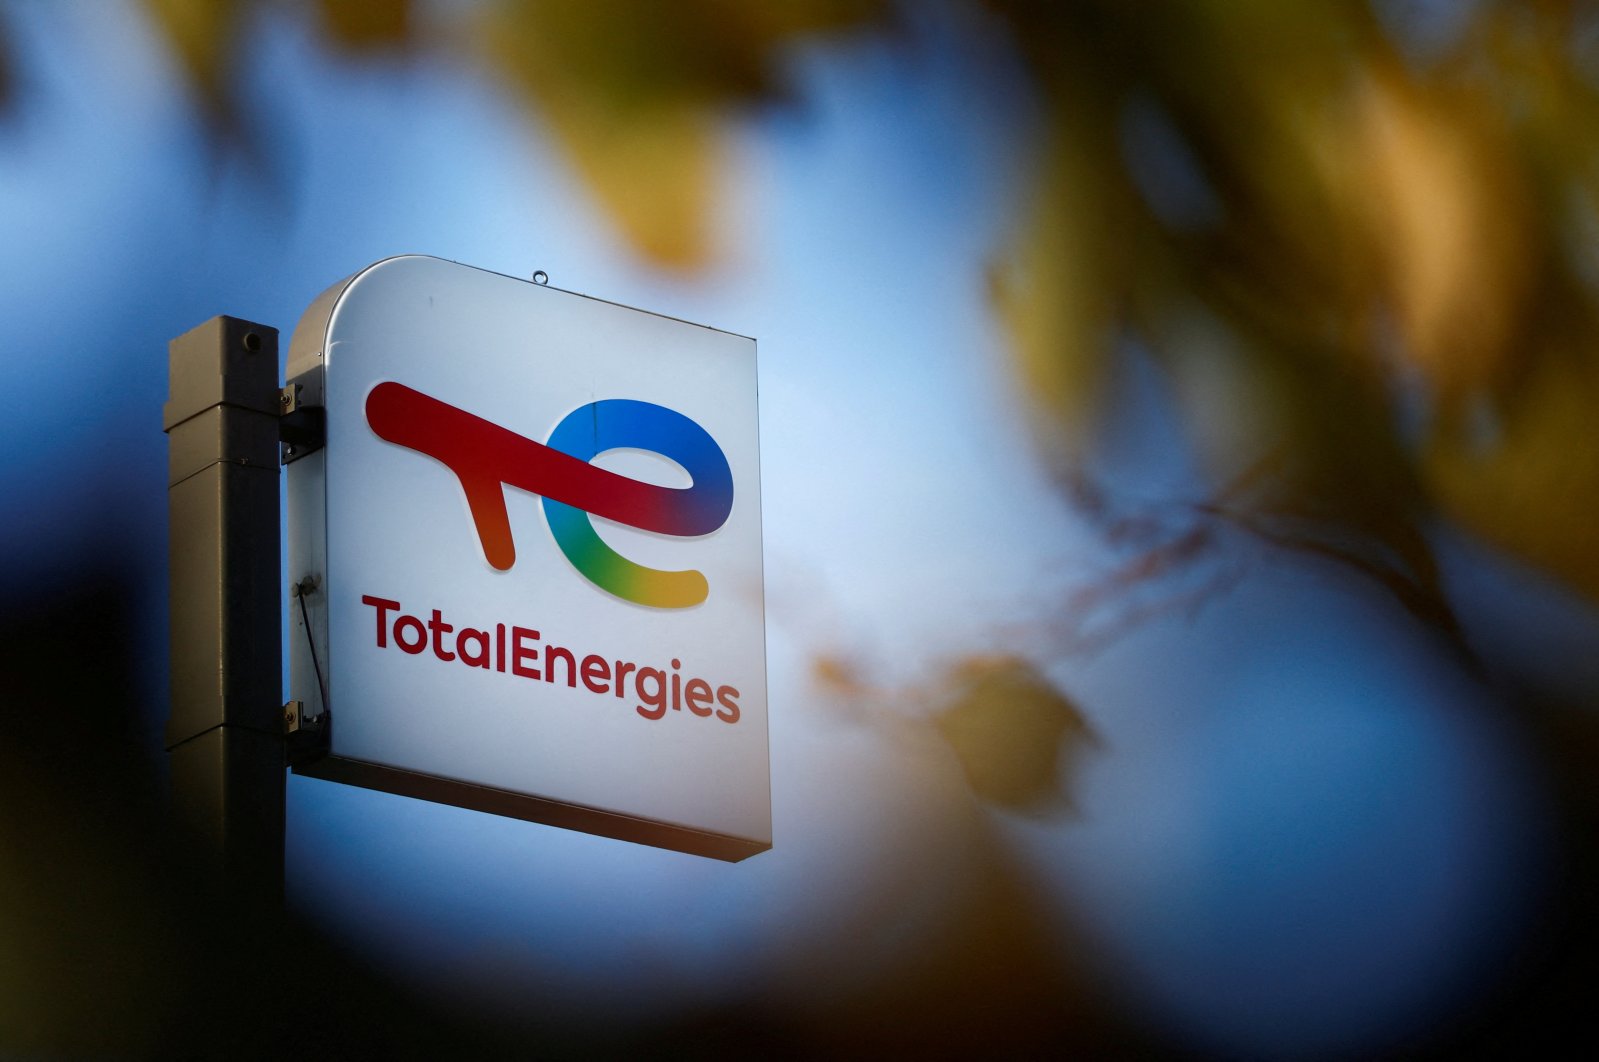 A sign with the logo of French oil and gas company TotalEnergies is pictured at a petrol station in Bouguenais near Nantes, France, Nov. 14, 2022. (Reuters Photo)